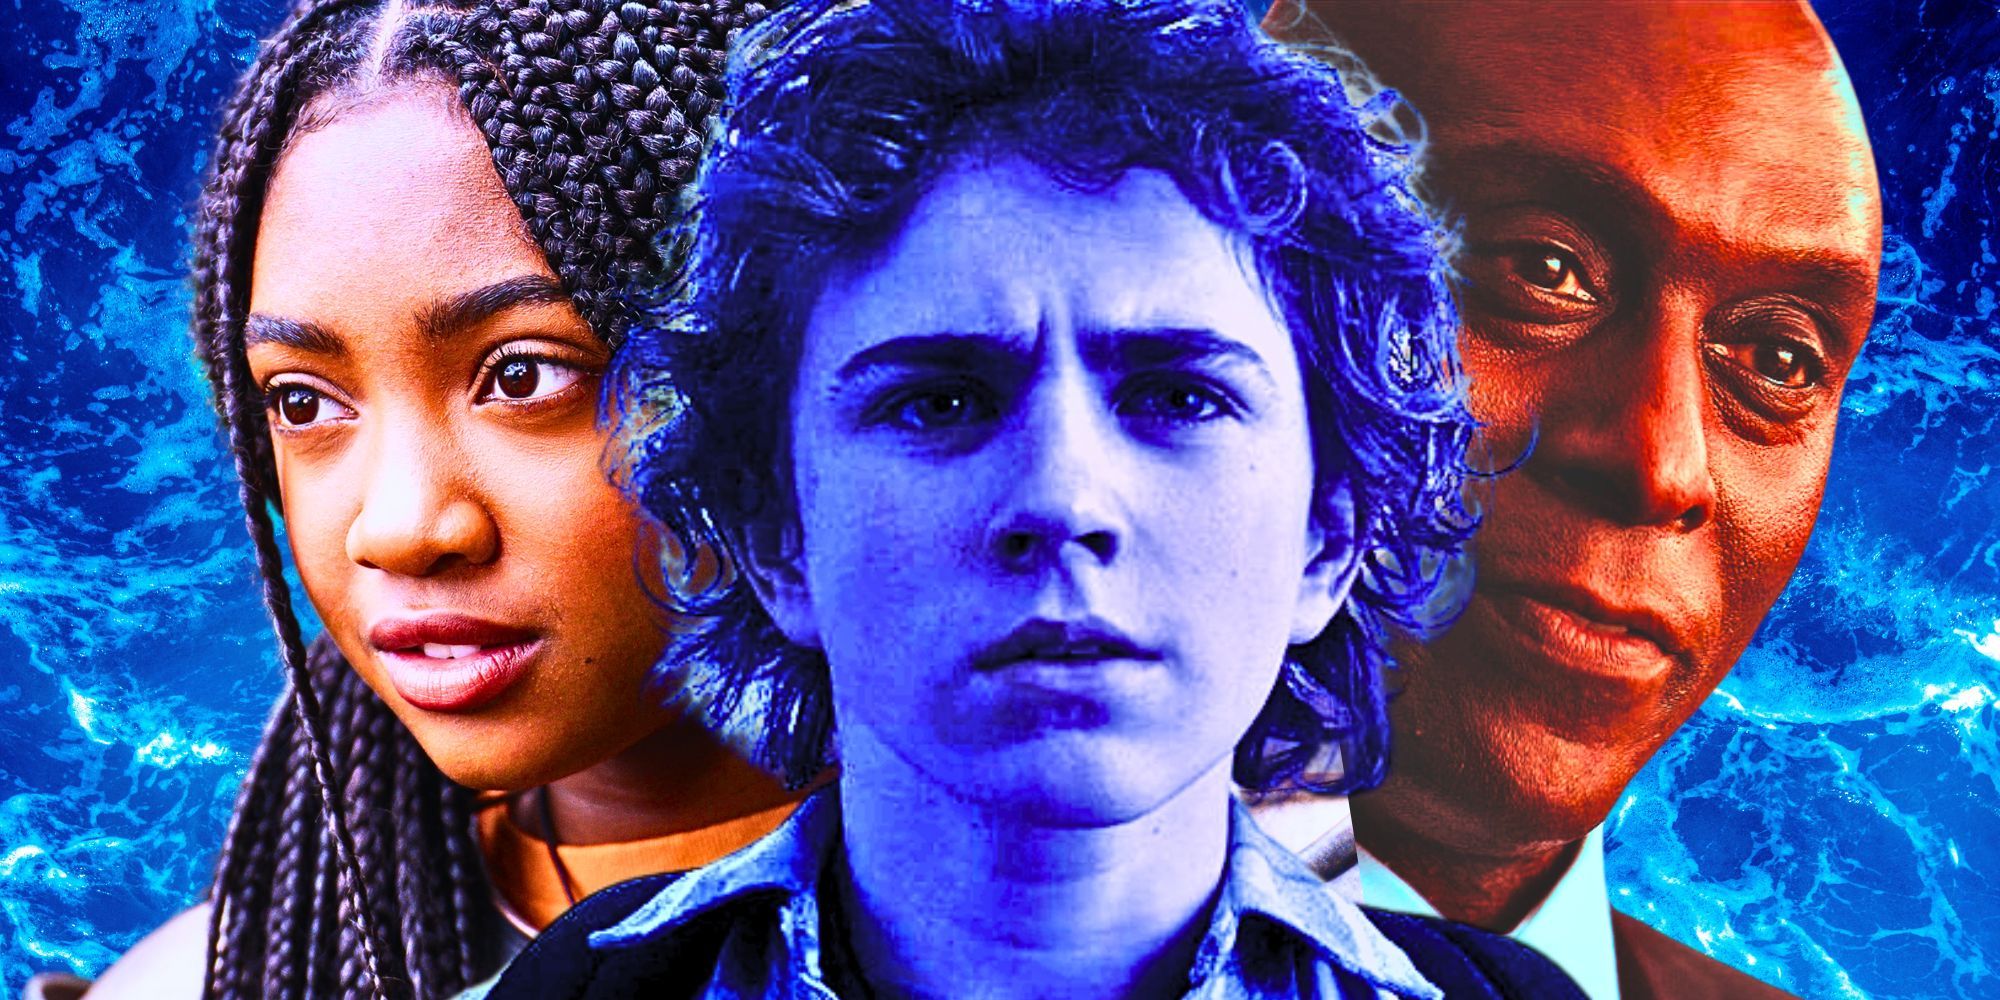 Image of Percy frowning in blue with Annabeth and Zeus on either side of him from Percy Jackson season 1